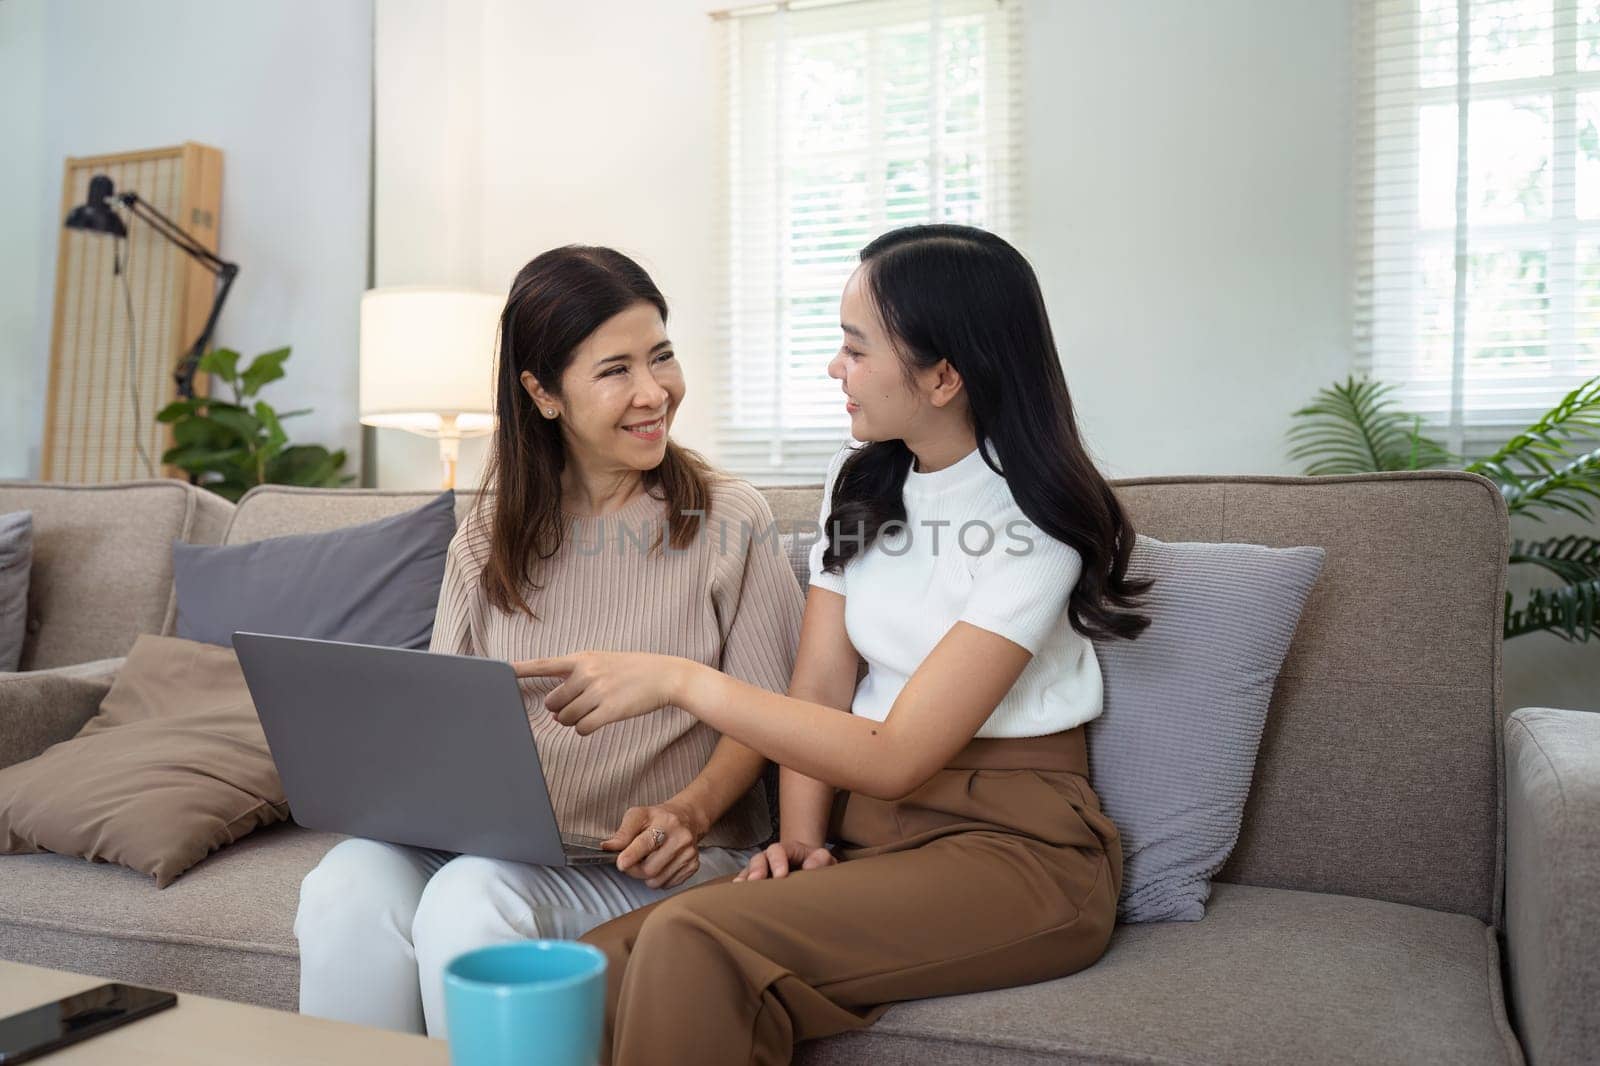 Mother and adult daughter sitting on the sofa together, mother and daughter using laptop to surf website together.